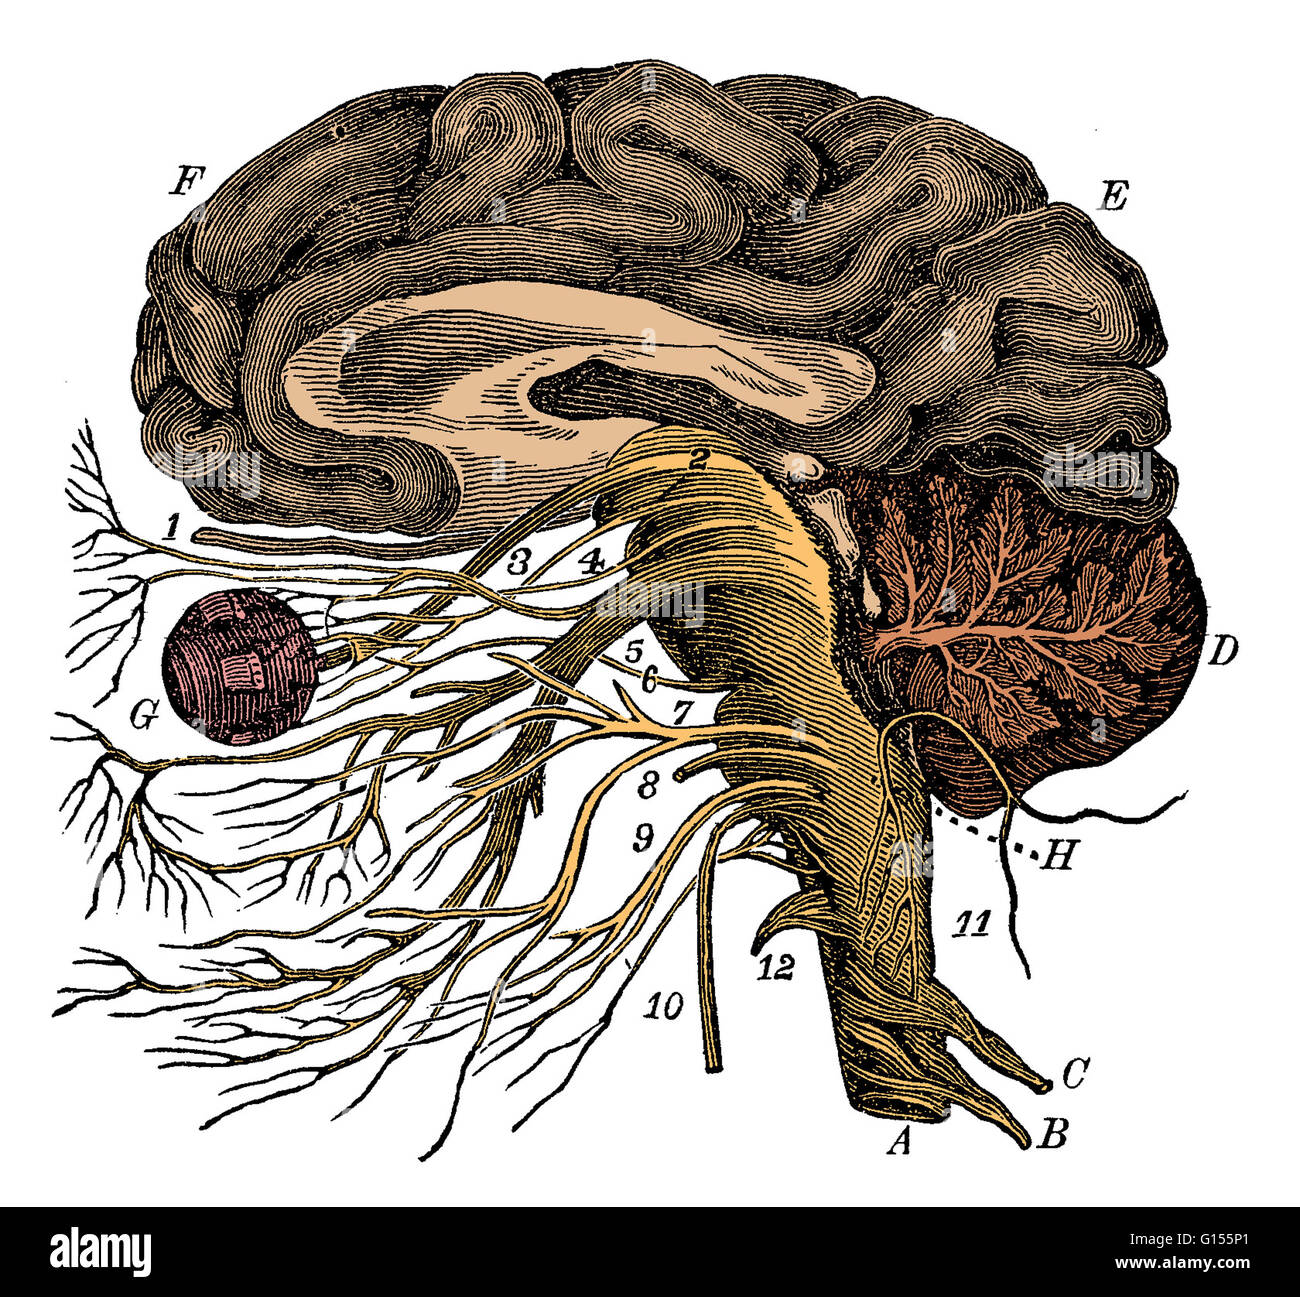 Color enhanced illustration of the brain, showing the origin of the twelve pairs of cranial nerves: olfactory, optic, oculomotor, trochlear, trigeminal, abducens, facial, vestibulocochlear, glossopharyngeal, vagus, accessory, and hypoglossal. Stock Photo